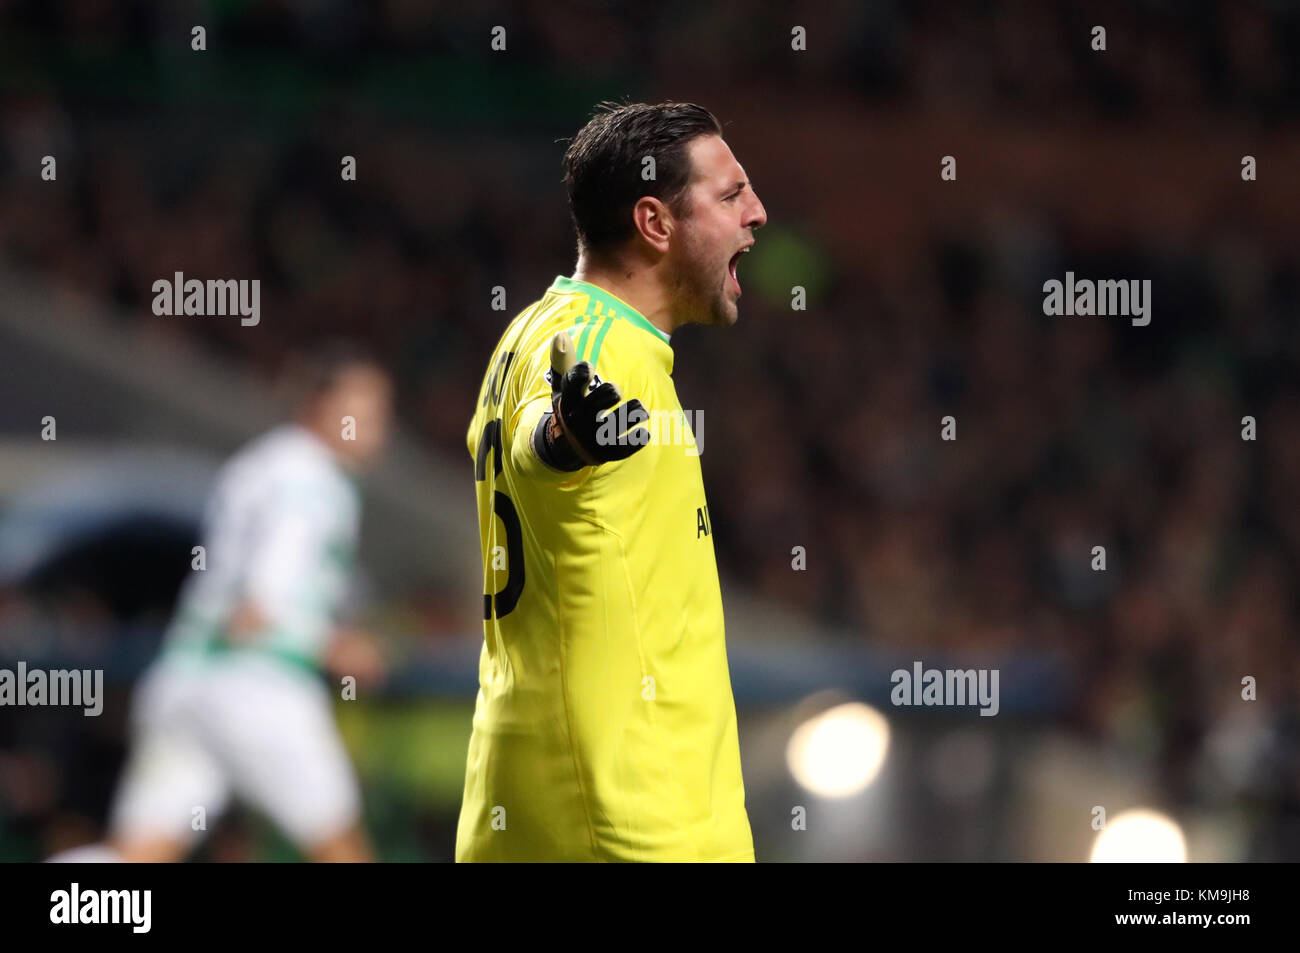 Anderlecht goalkeeper Frank Boeckx during the UEFA Champions League match at Celtic Park, Glasgow. PRESS ASSOCIATION Photo. Picture date: Tuesday December 5, 2017. See PA Story SOCCER Celtic. Photo credit should read: Andrew Milligan/PA Wire Stock Photo